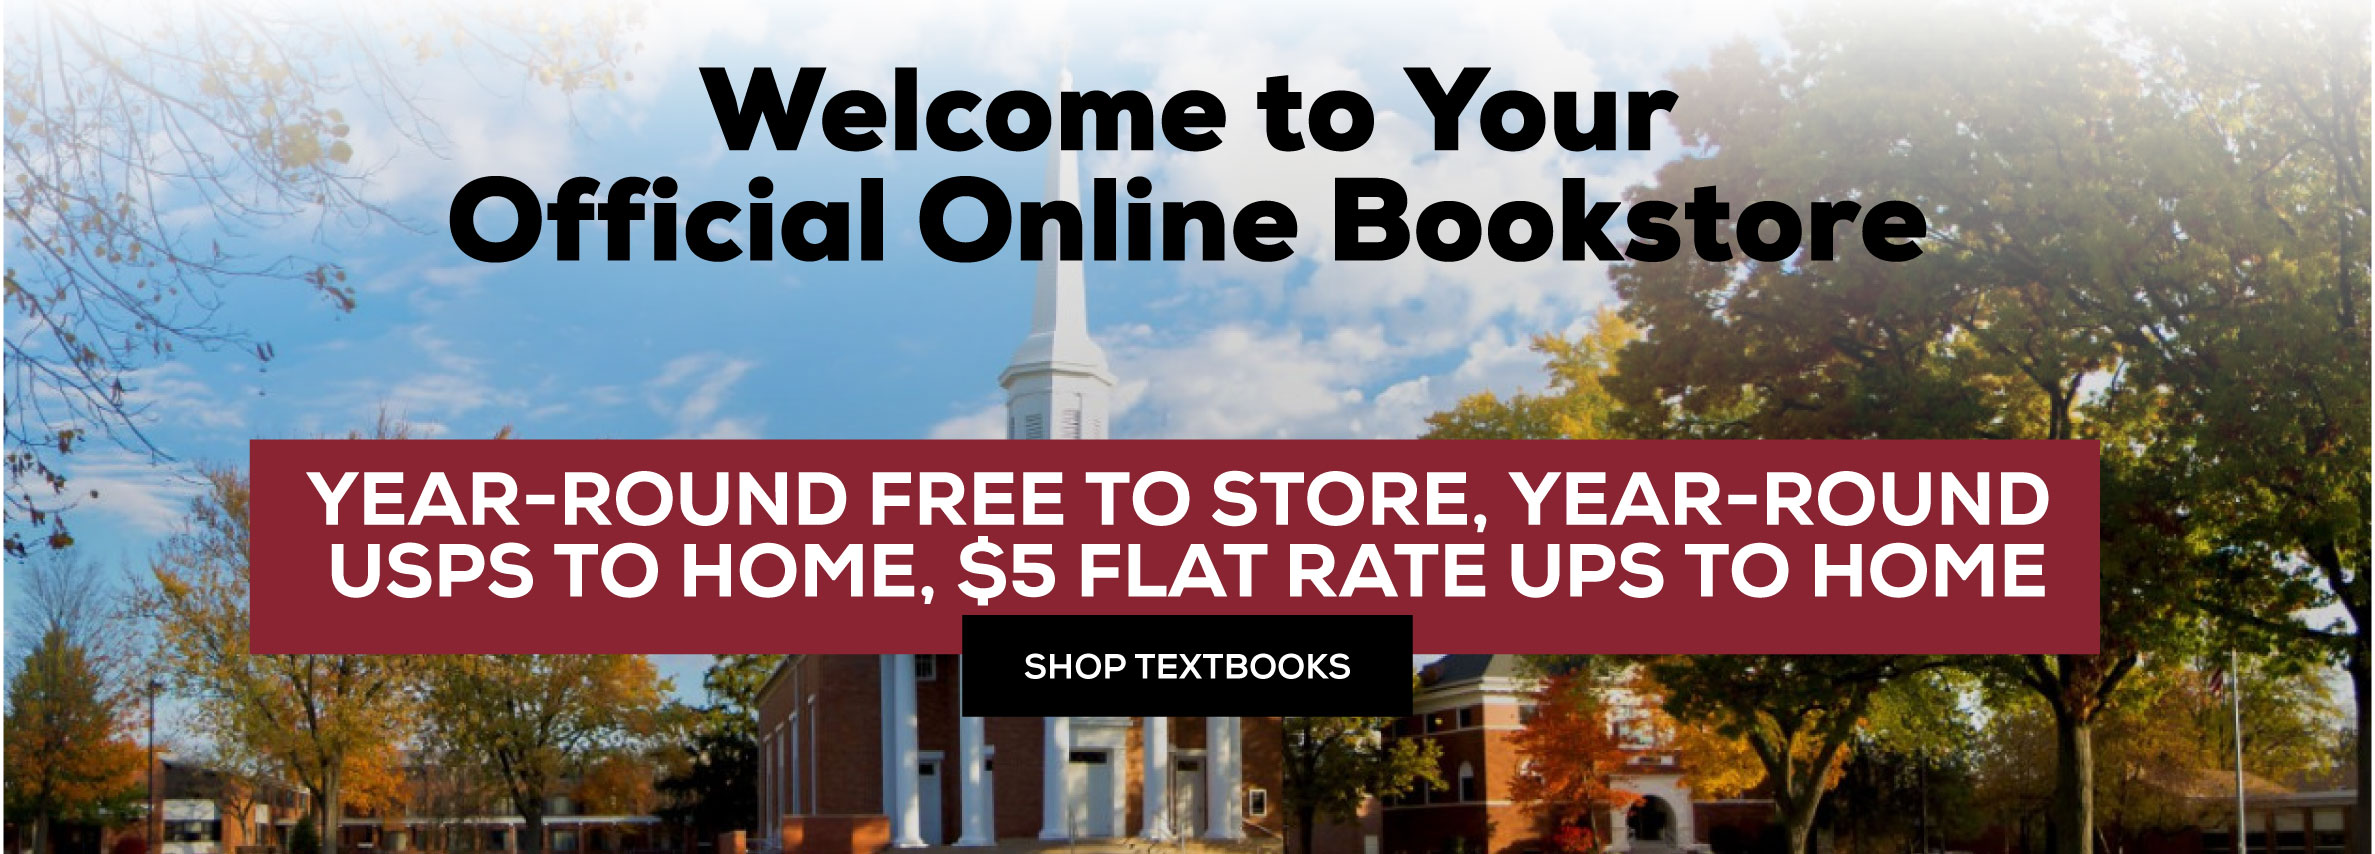 Welcome to Your Official Online Bookstore - Year-Round free to store, Year-Round USPS to home, $5 flat rate UPS to home Shop Textbooks